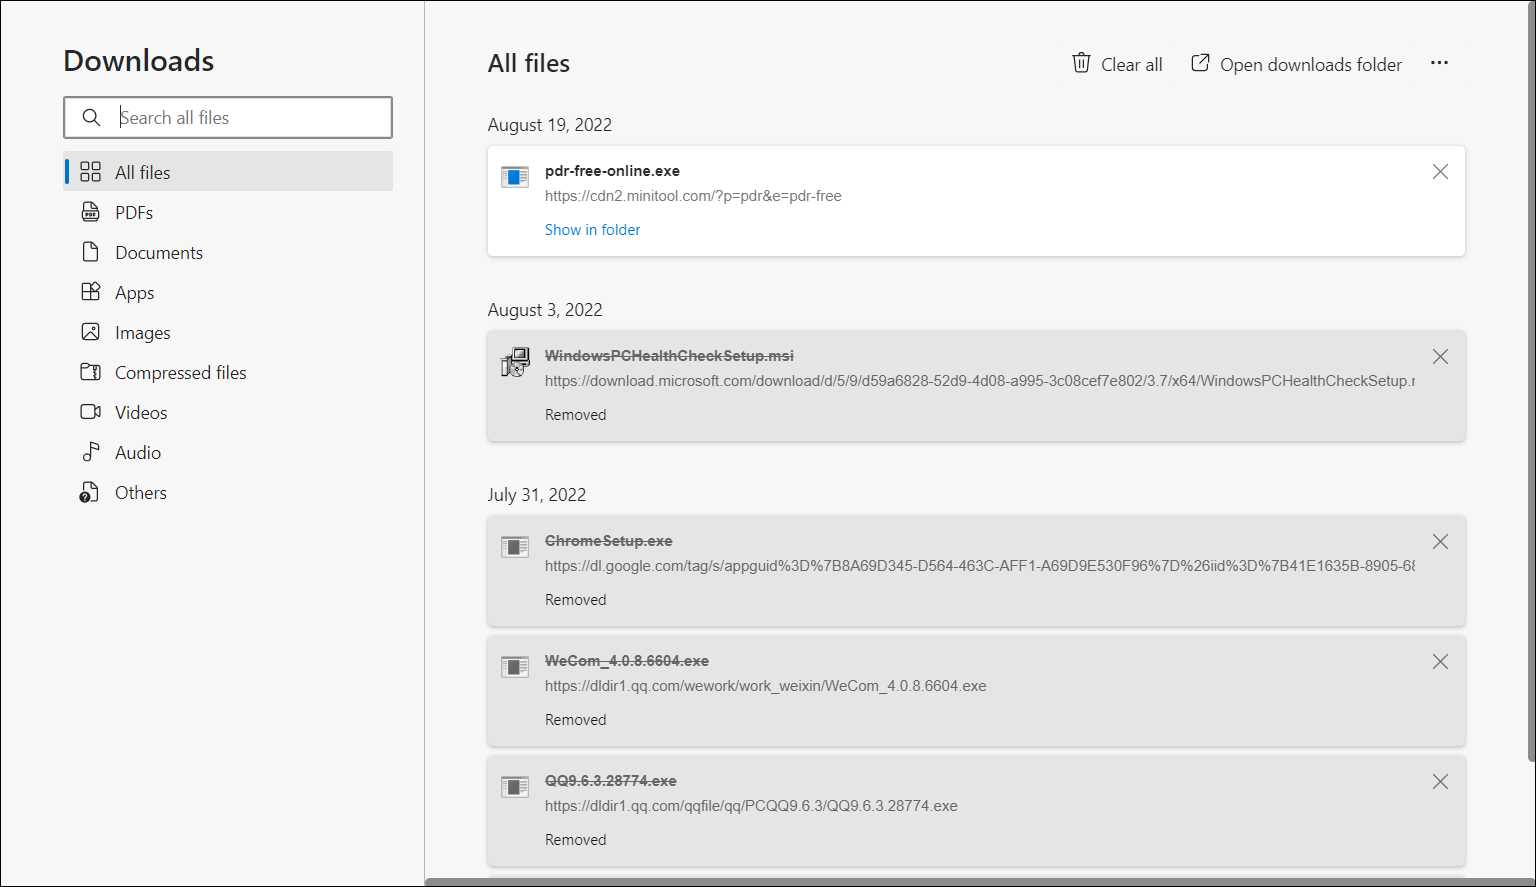 Downloads history in Edge